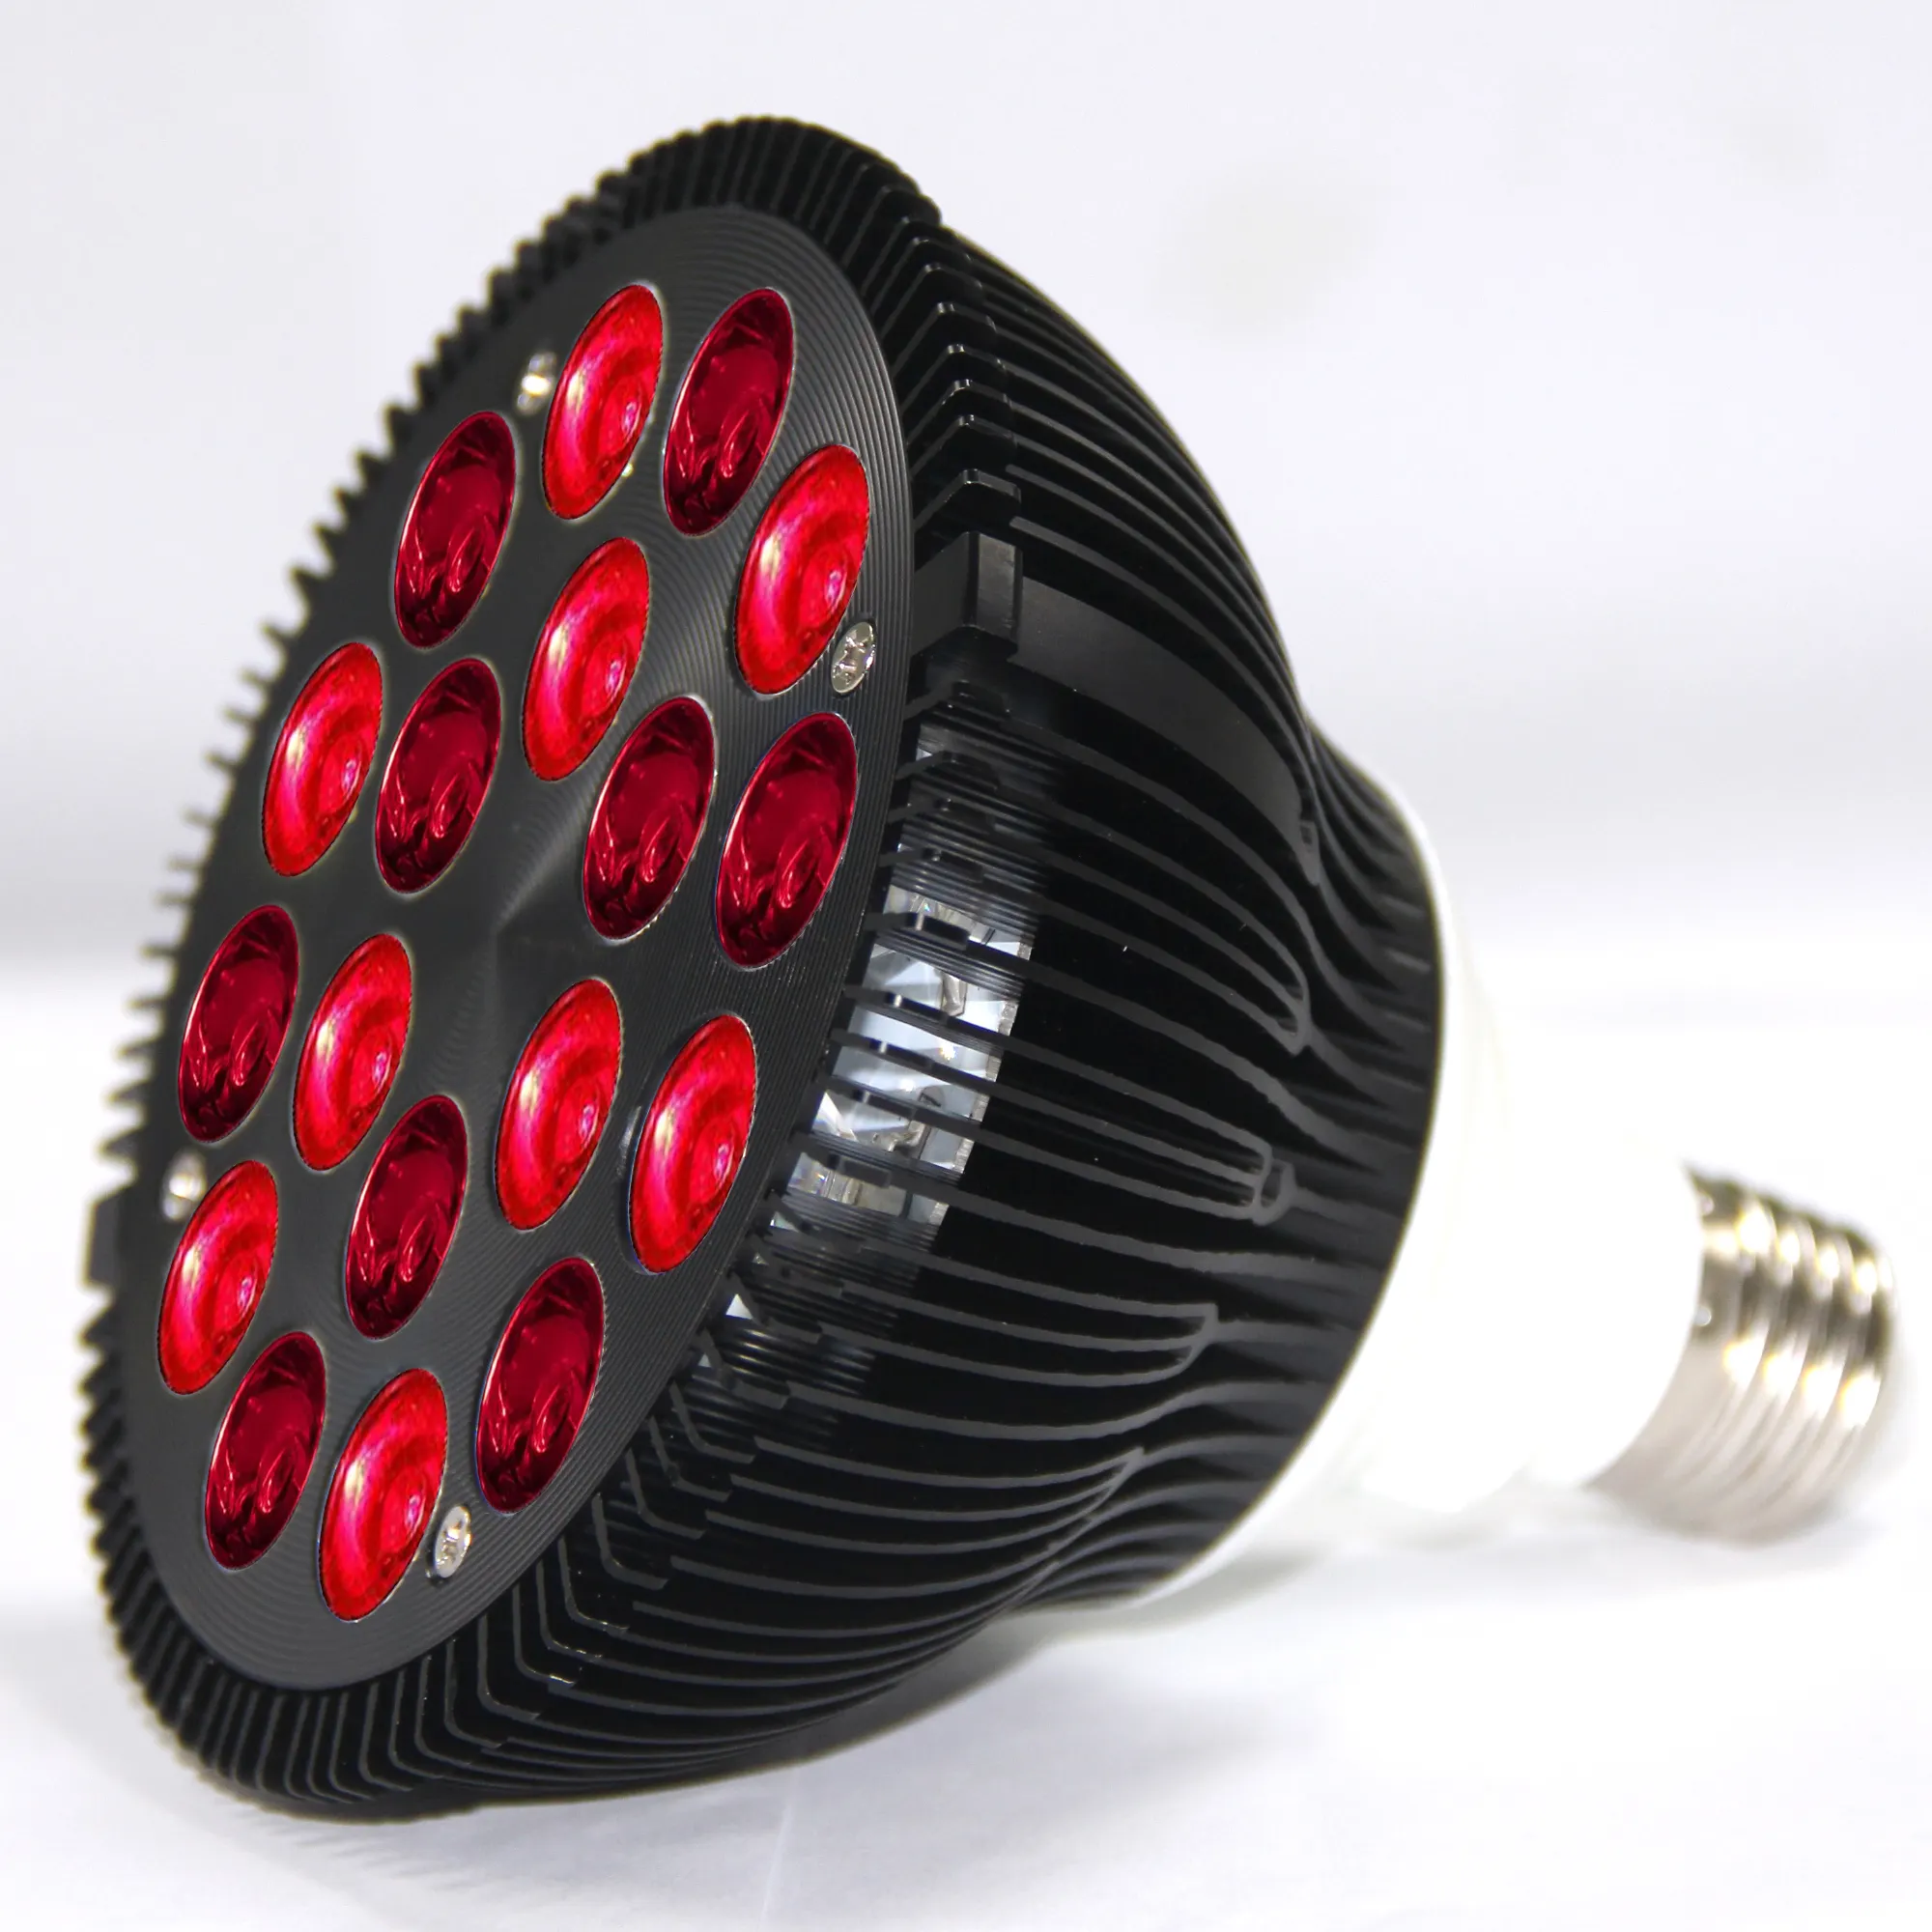 Custom Led Infrared For Health Red Light Therapy Bed Bulb Phototherapy Machine Full Body Use 850nm Light Therapy Lamp